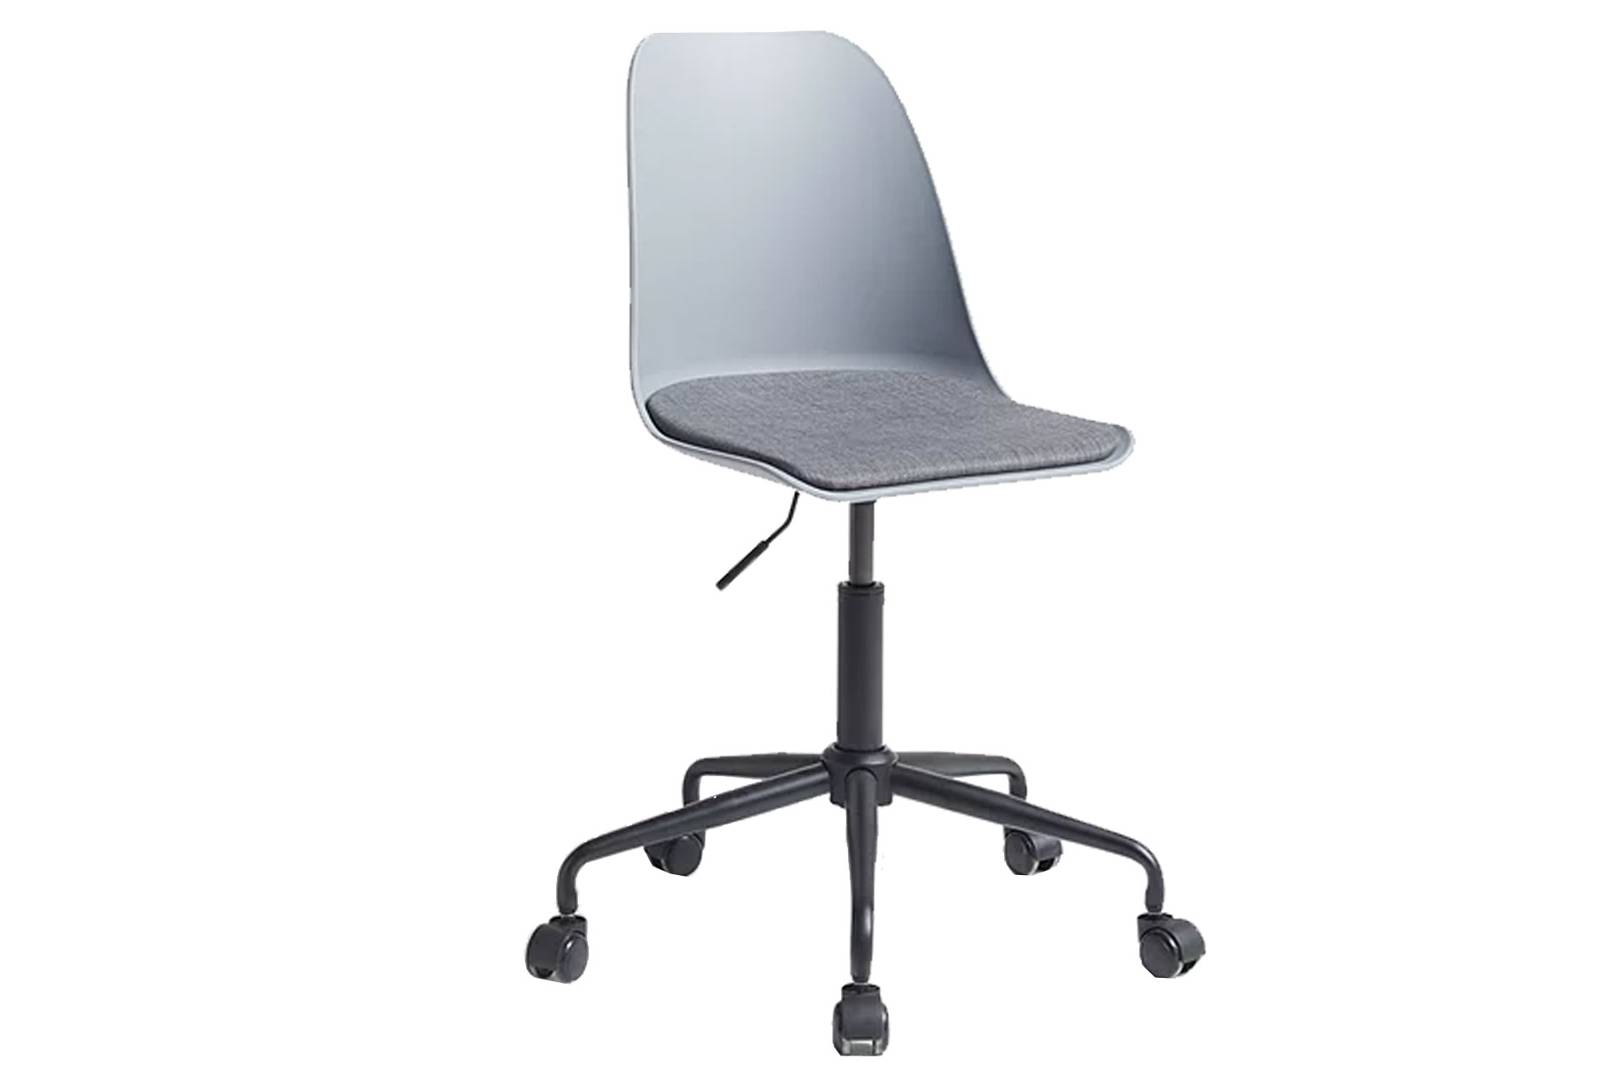 19 Best Ergonomic Office Chairs for Every Budget: Desk Chairs for WFH